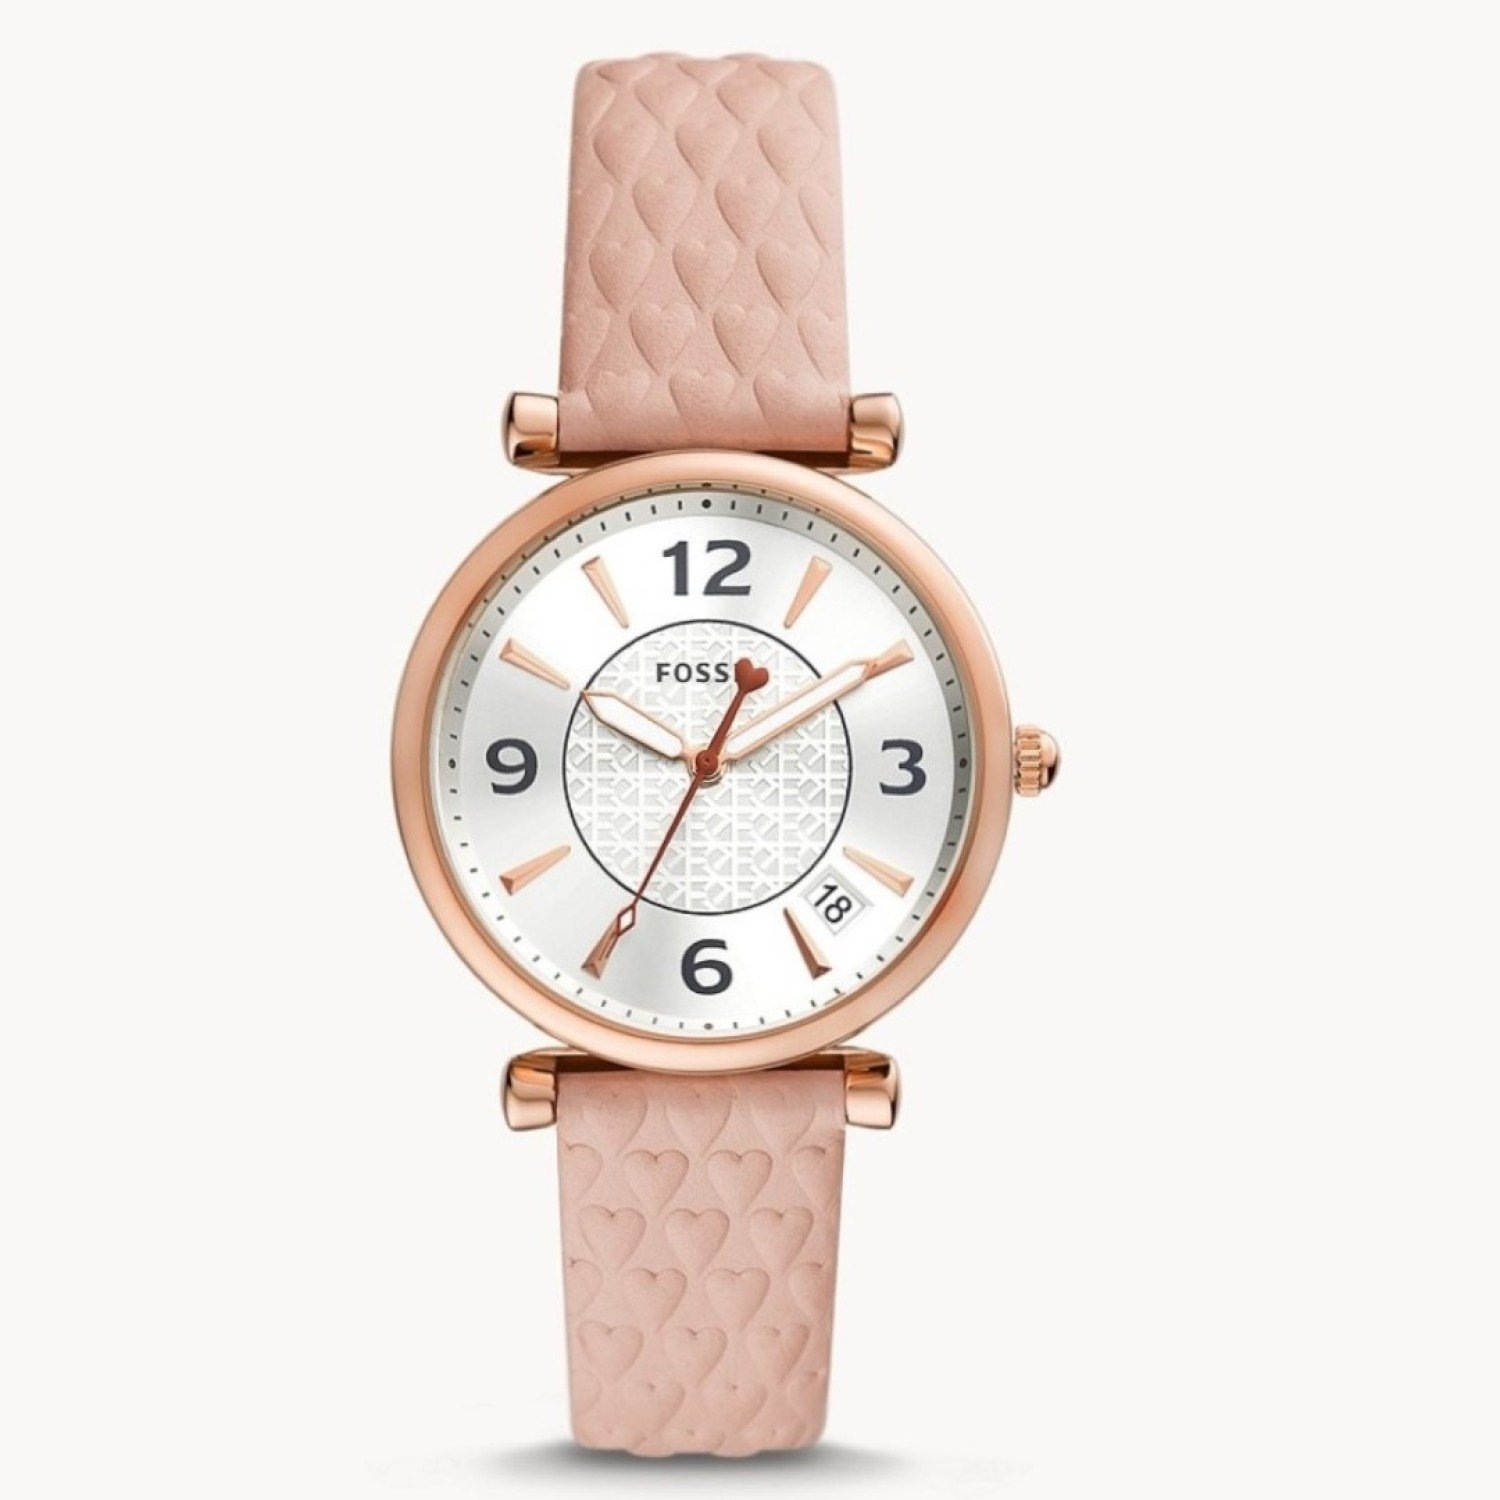 ES5269 Fossil Carlie Three-Hand Date Blush Leather Watch. unique engagement rings nz   The ES5269 Fossil Carlie Watch is an elegant timepiece with sophistication and style.